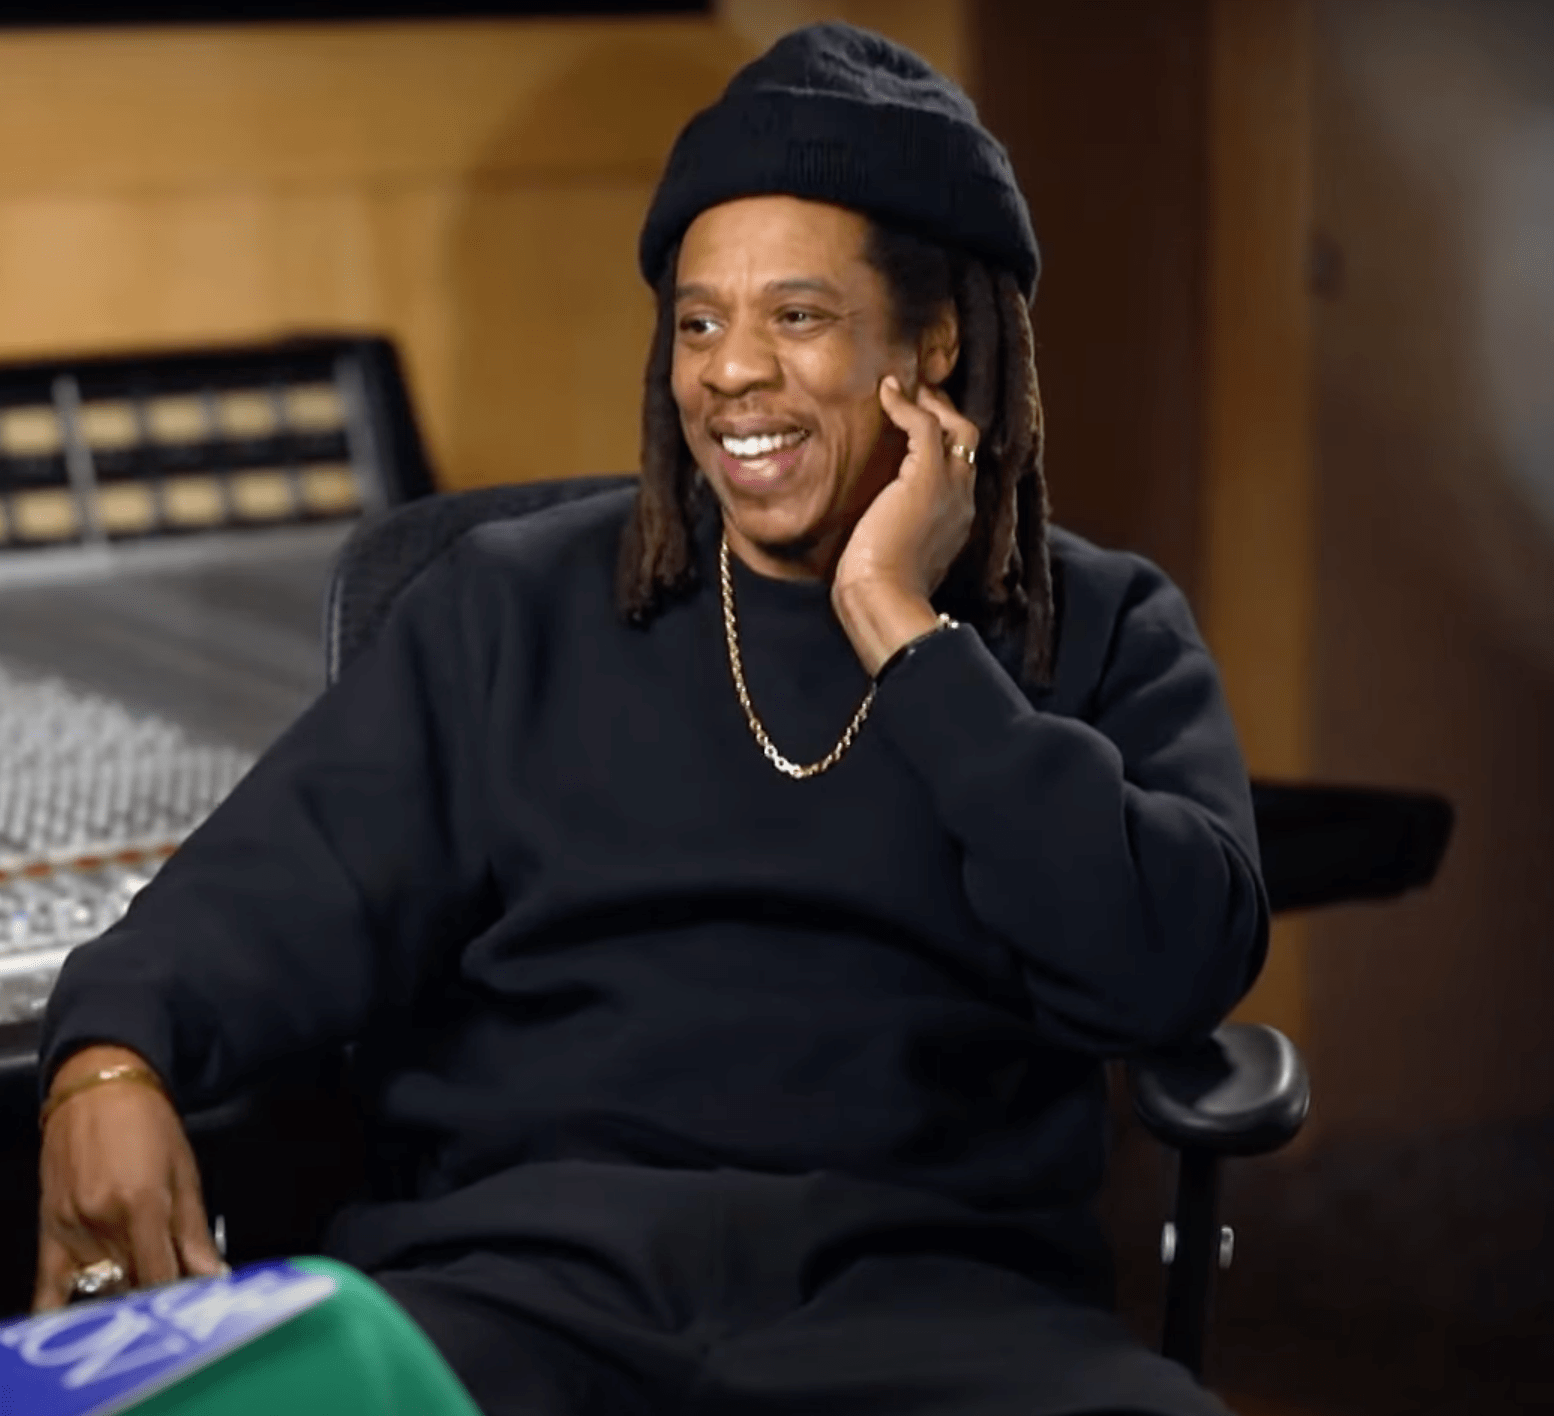 Jay-Z Finally Settles “The Lunch with Jay-Z Or $500,000 Cash” Debate